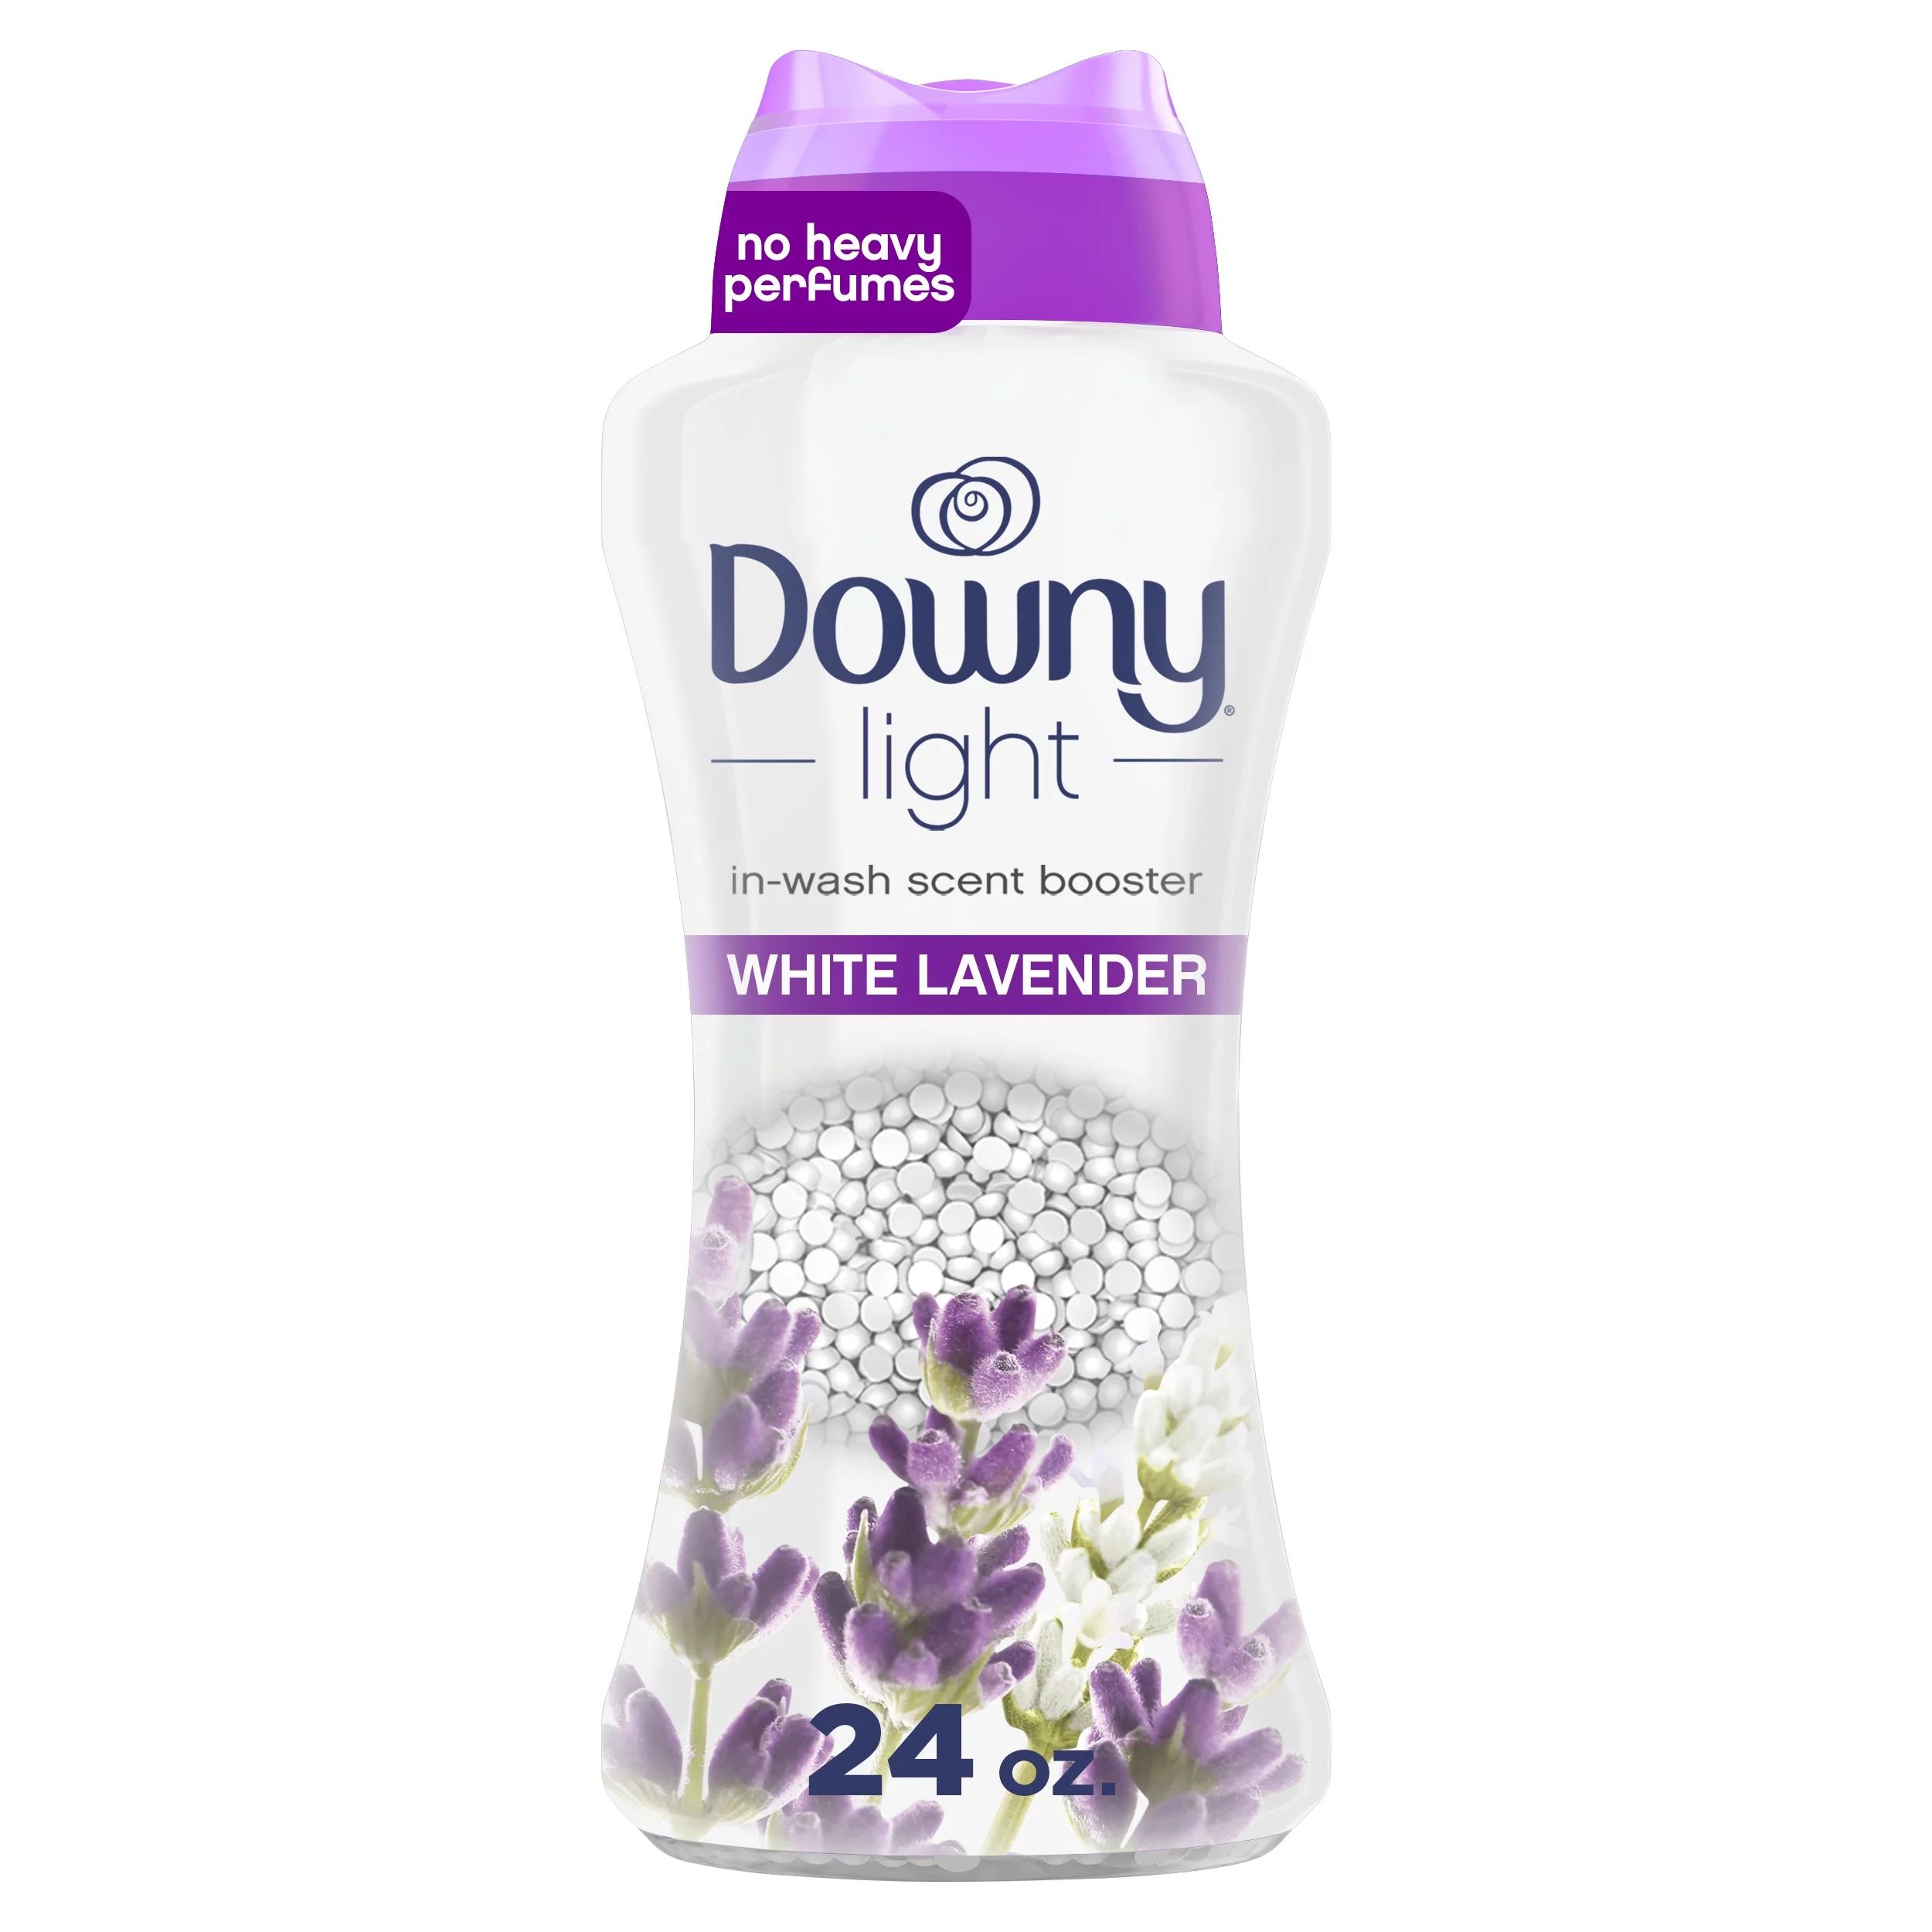 Downy Light Laundry Scent Booster Beads for Washer, White Lavender, 24 oz, with No Heavy Perfumes... | Walmart (US)